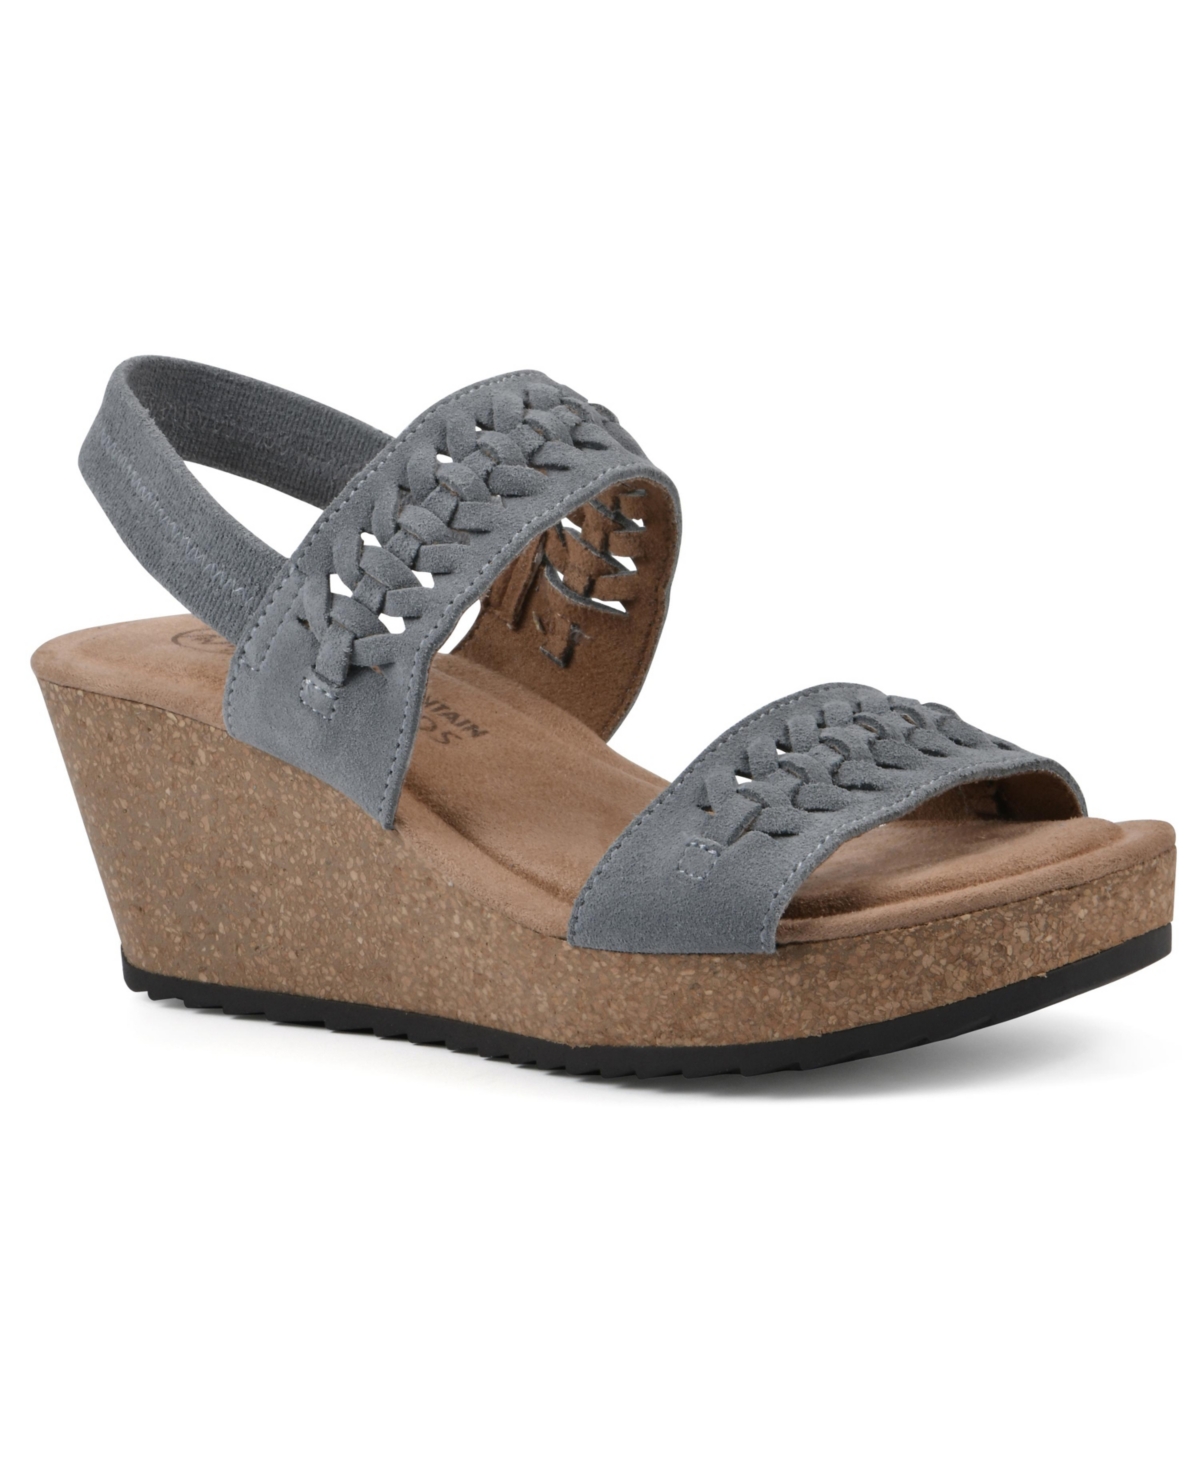 Women's Pretreat Footbed Wedge Sandals - Brown Leather